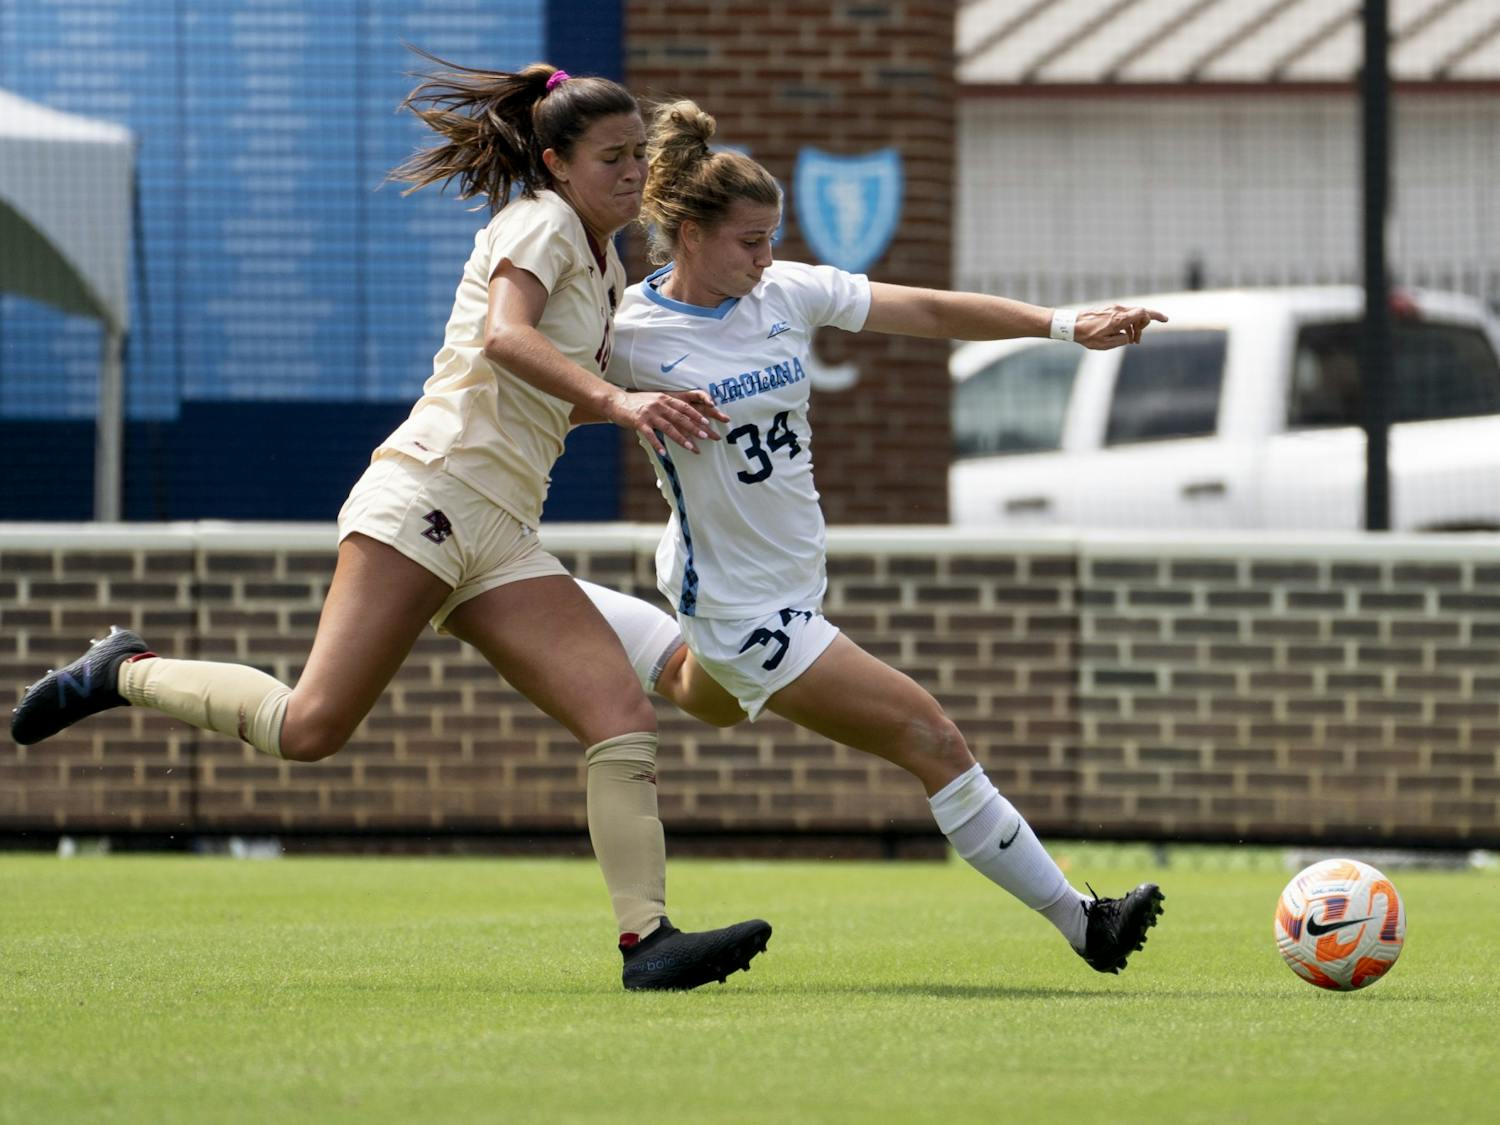 First-year forward Tessa Dellarose (34) races a Boston College player for the ball at the UNC women’s soccer game against Boston College at Dorrance Field on Sunday, Sept. 25, 2022. UNC won 3-0.